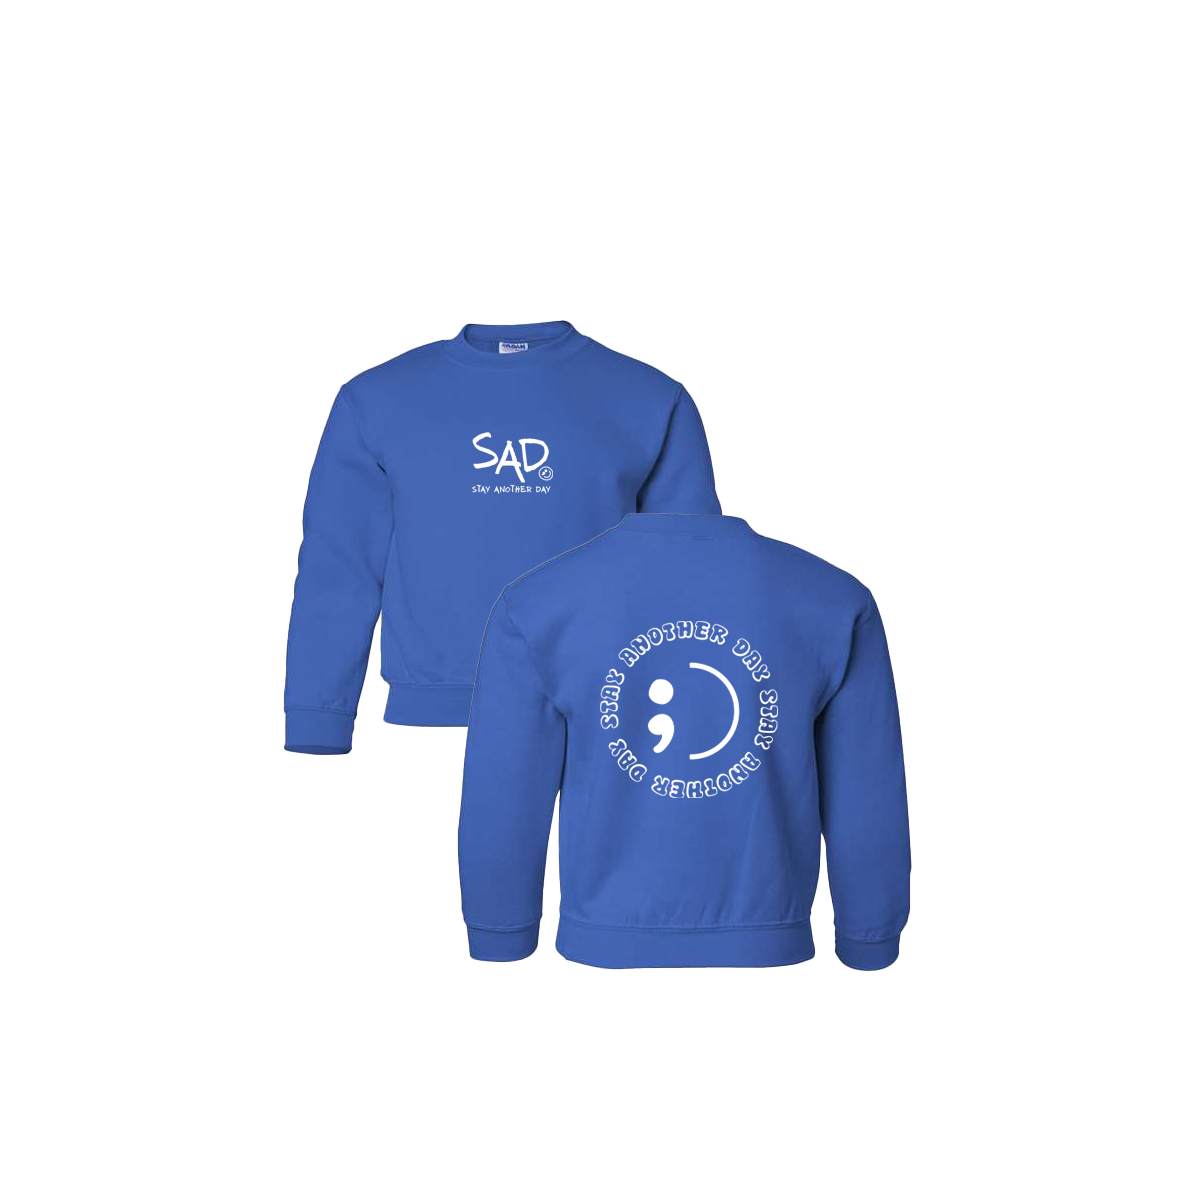 Stay Another Day Circle Screen Printed Royal Blue Youth Crewneck